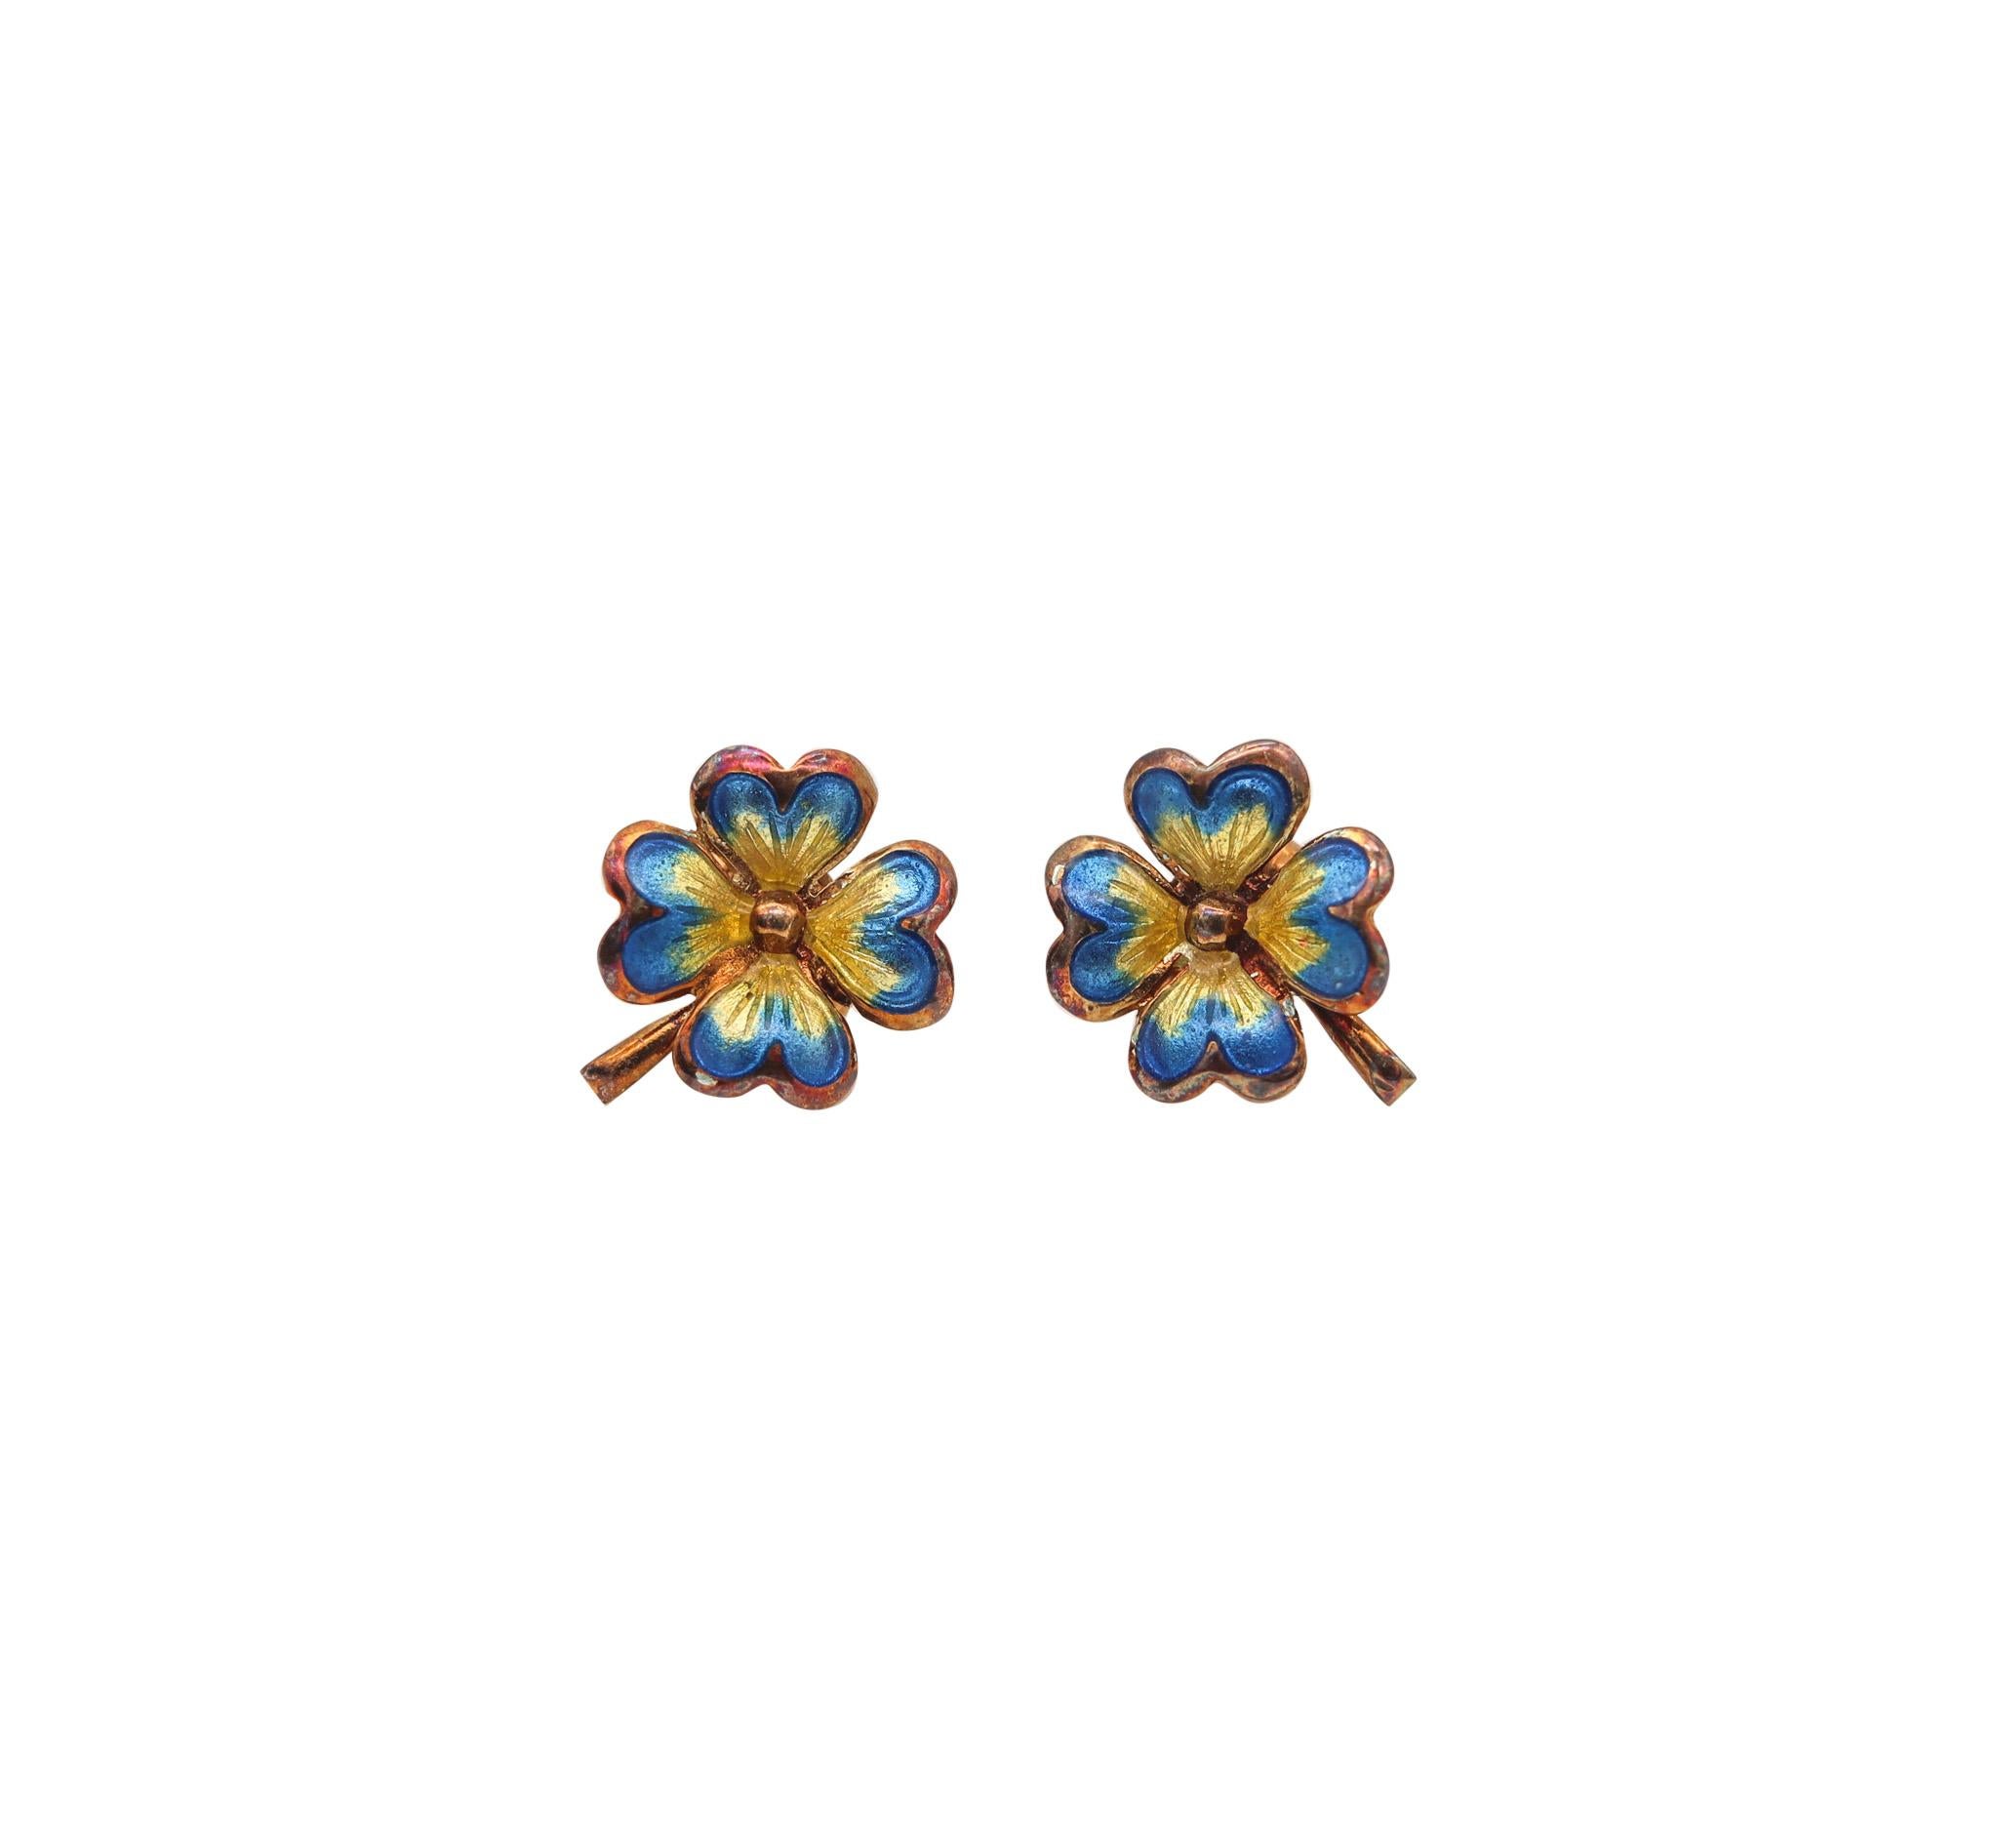 Art nouveau enameled flower pendant and earrings.

Beautiful and colorful set composed by a pair of stud earrings and a pendant, created in America during the Edwardian and the Art Nouveau periods, back in the 1905. This set has been carefully